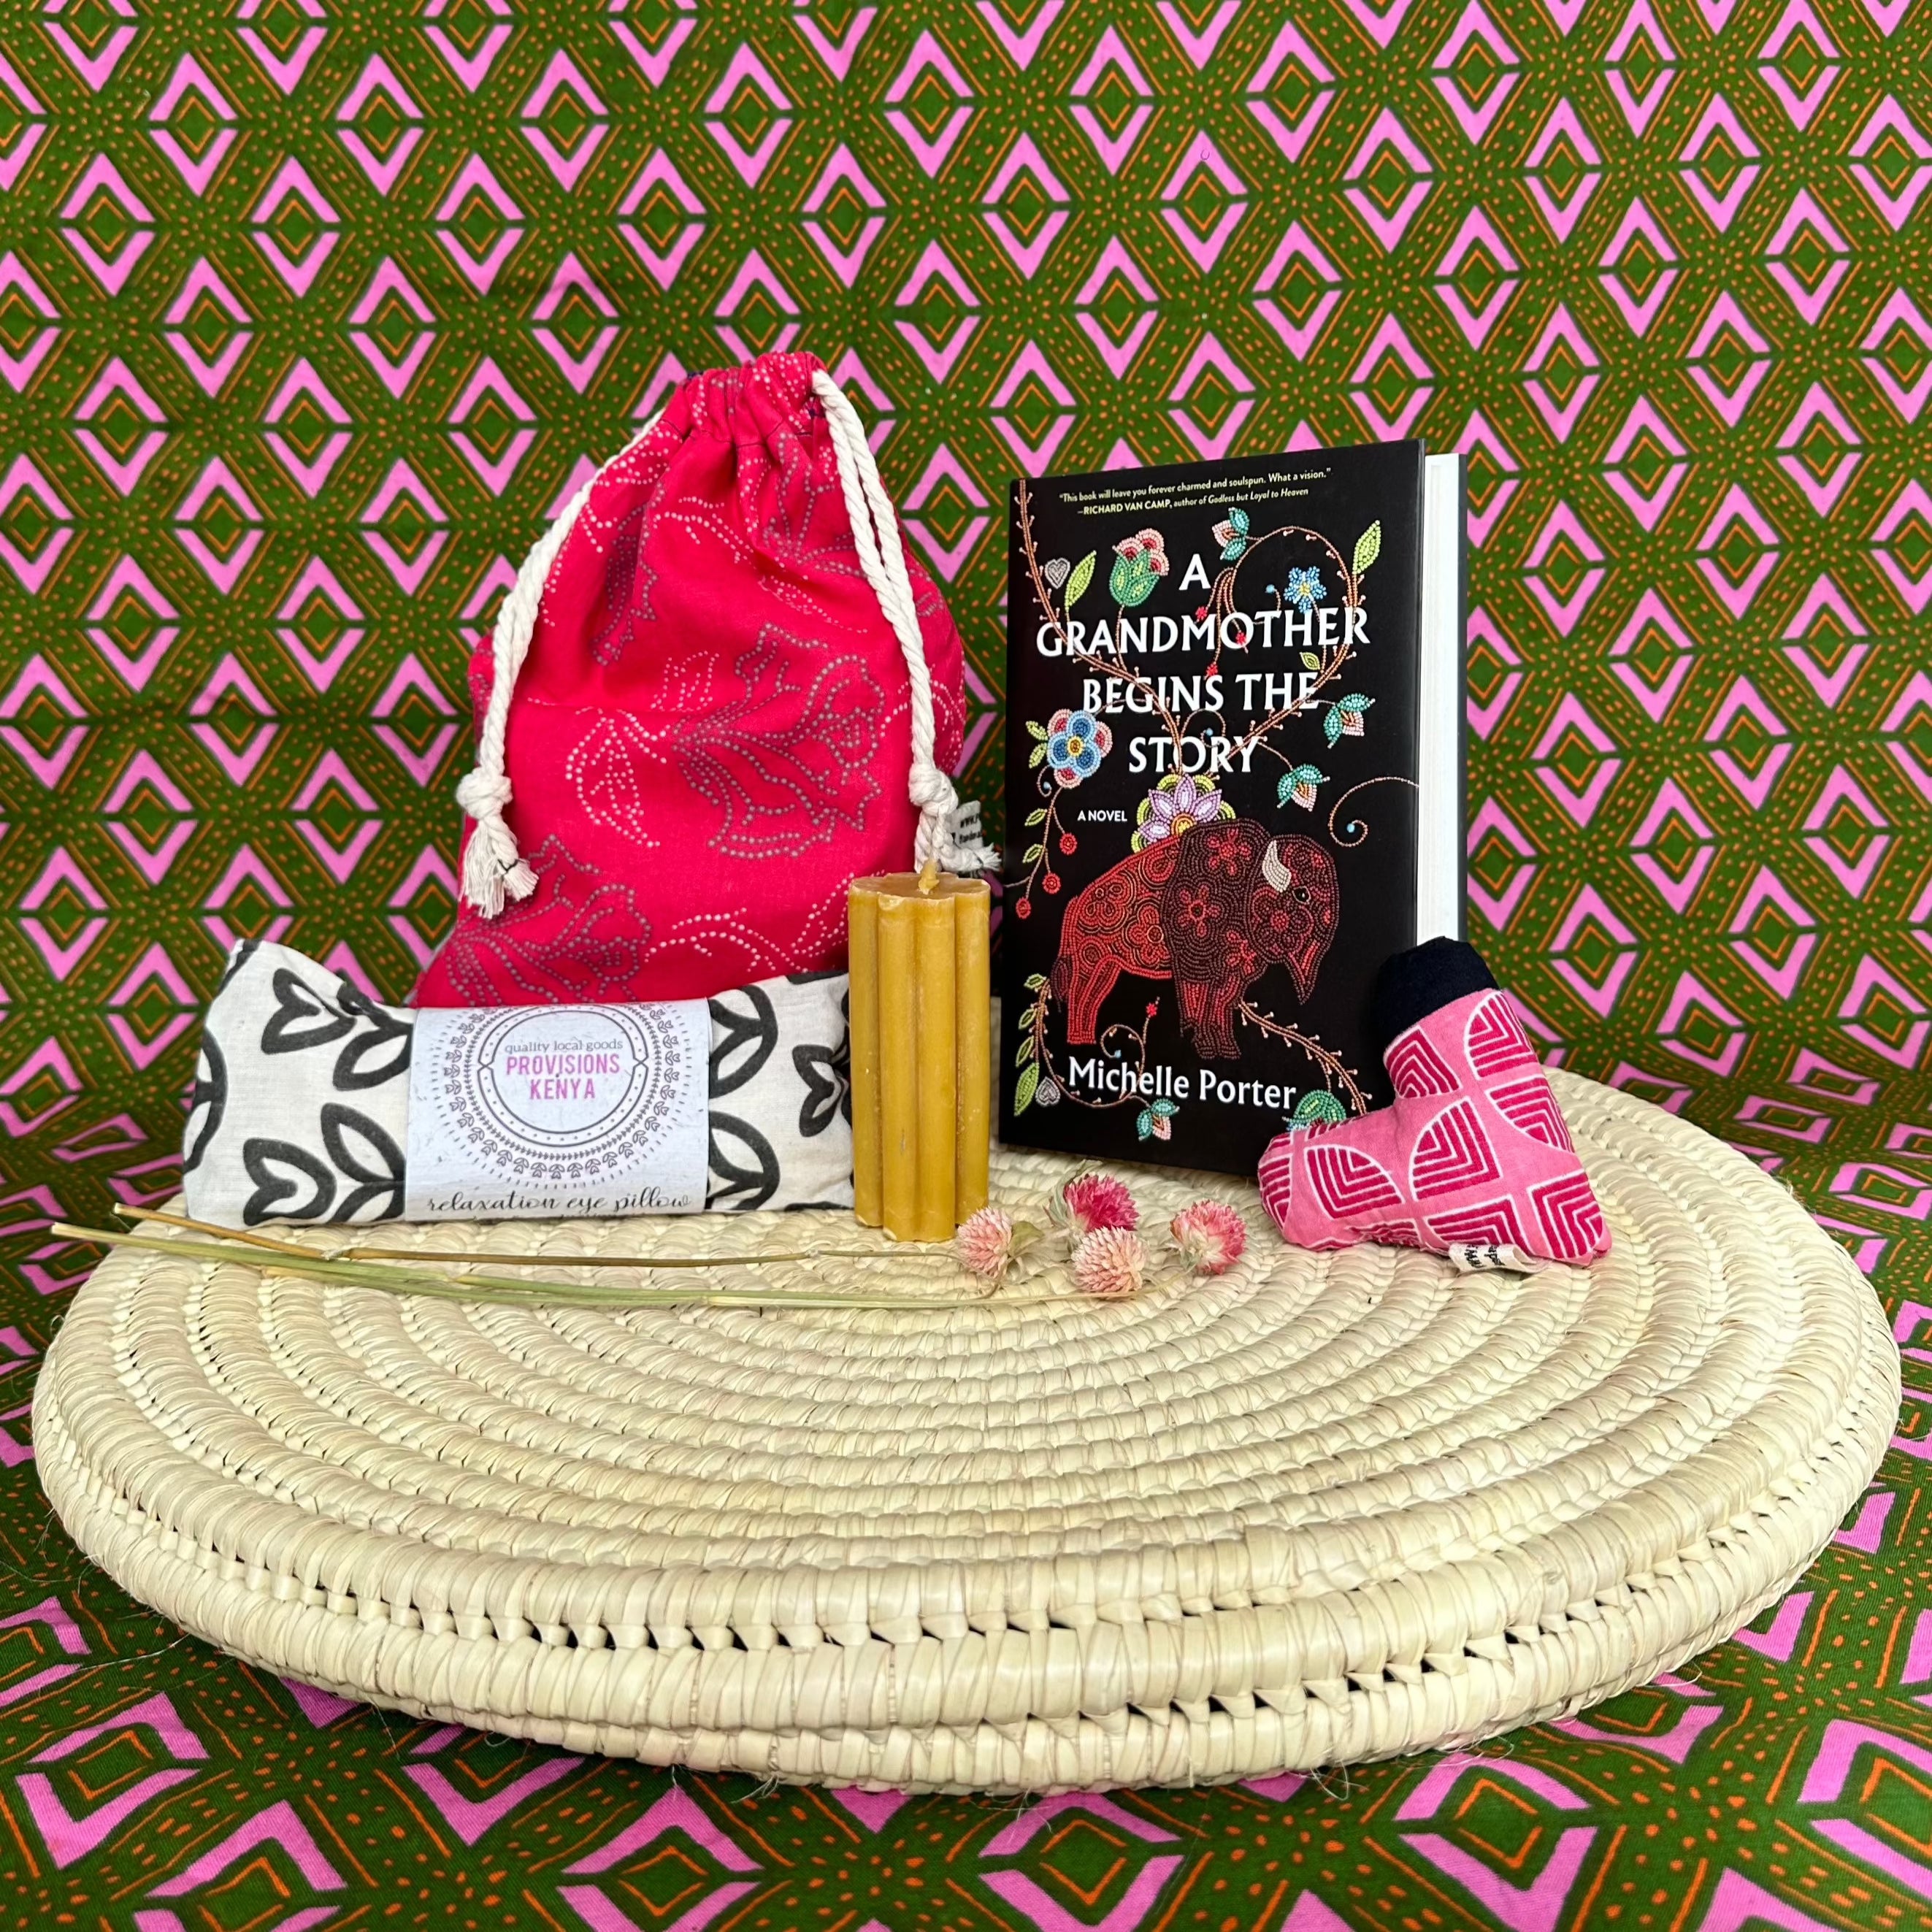 Display of " A Grandmother Begins The Story" book bundle